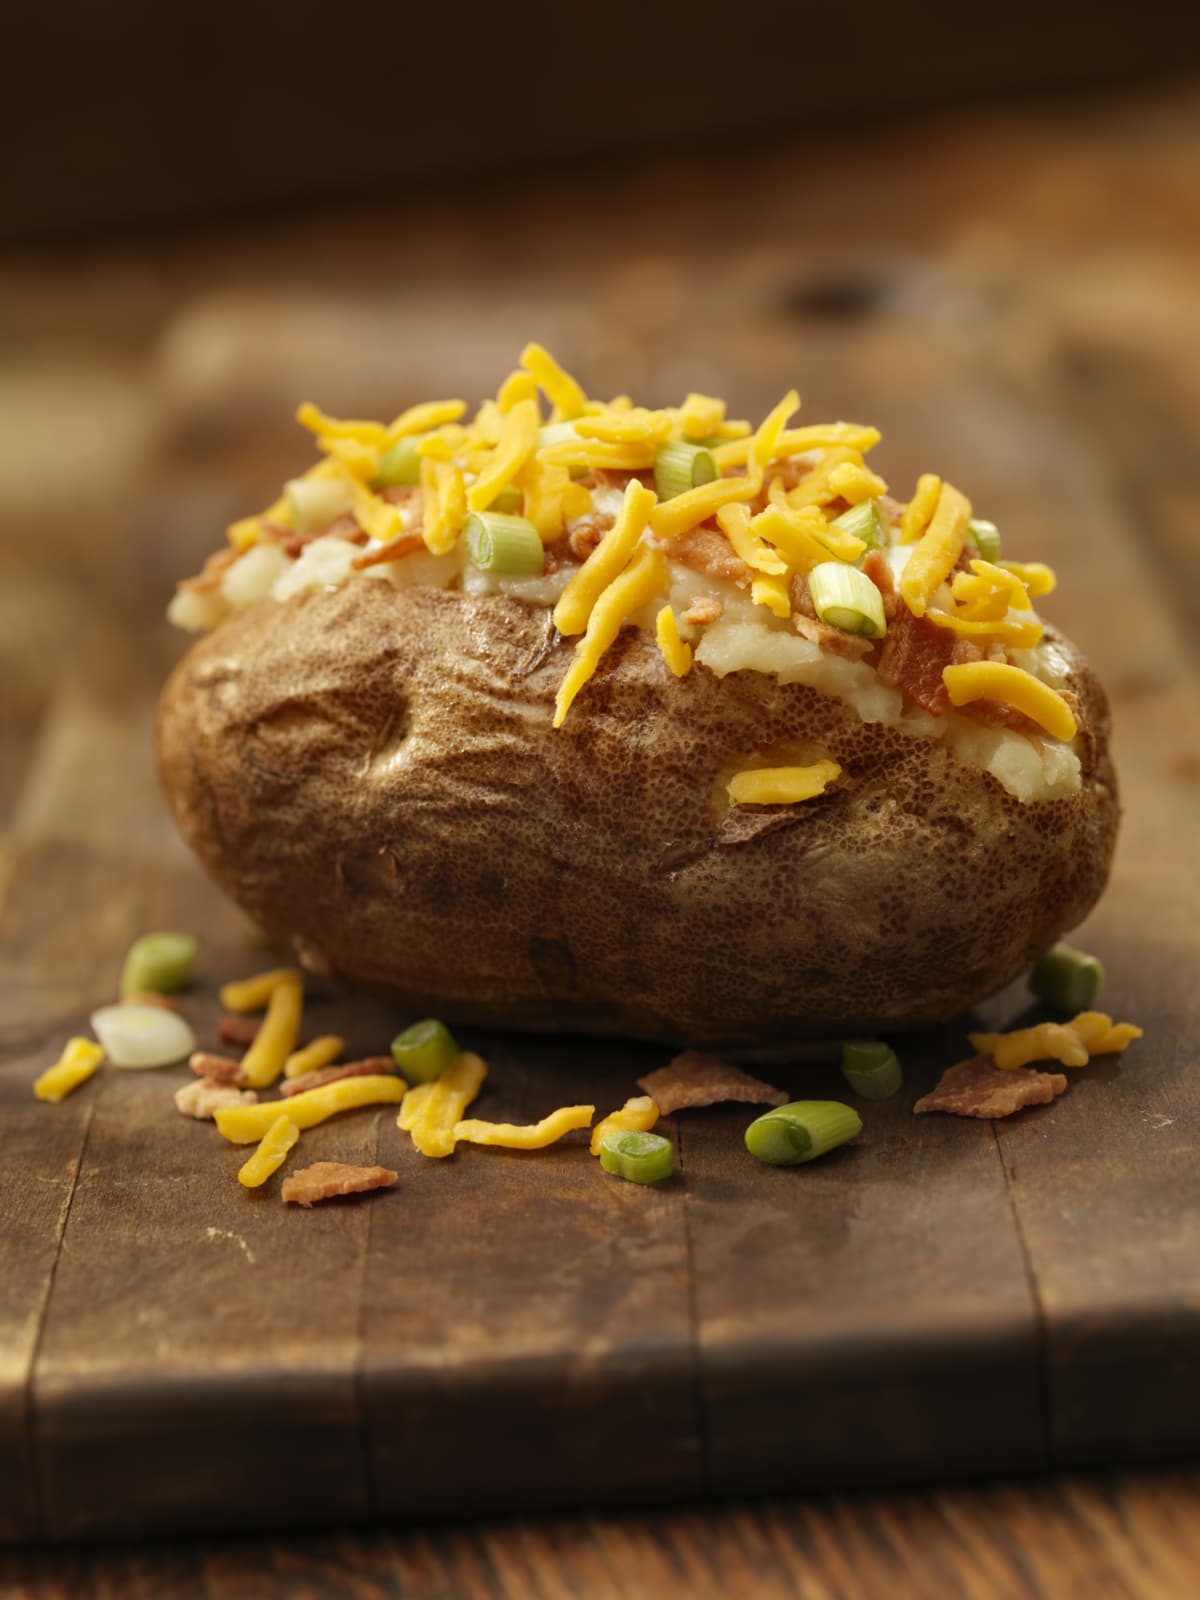 Baked Potato Topped with Bacon, Sour Cream, Green Onions and Cheddar Cheese with Garlic Bread -Photographed on Hasselblad H3D-39mb Camera